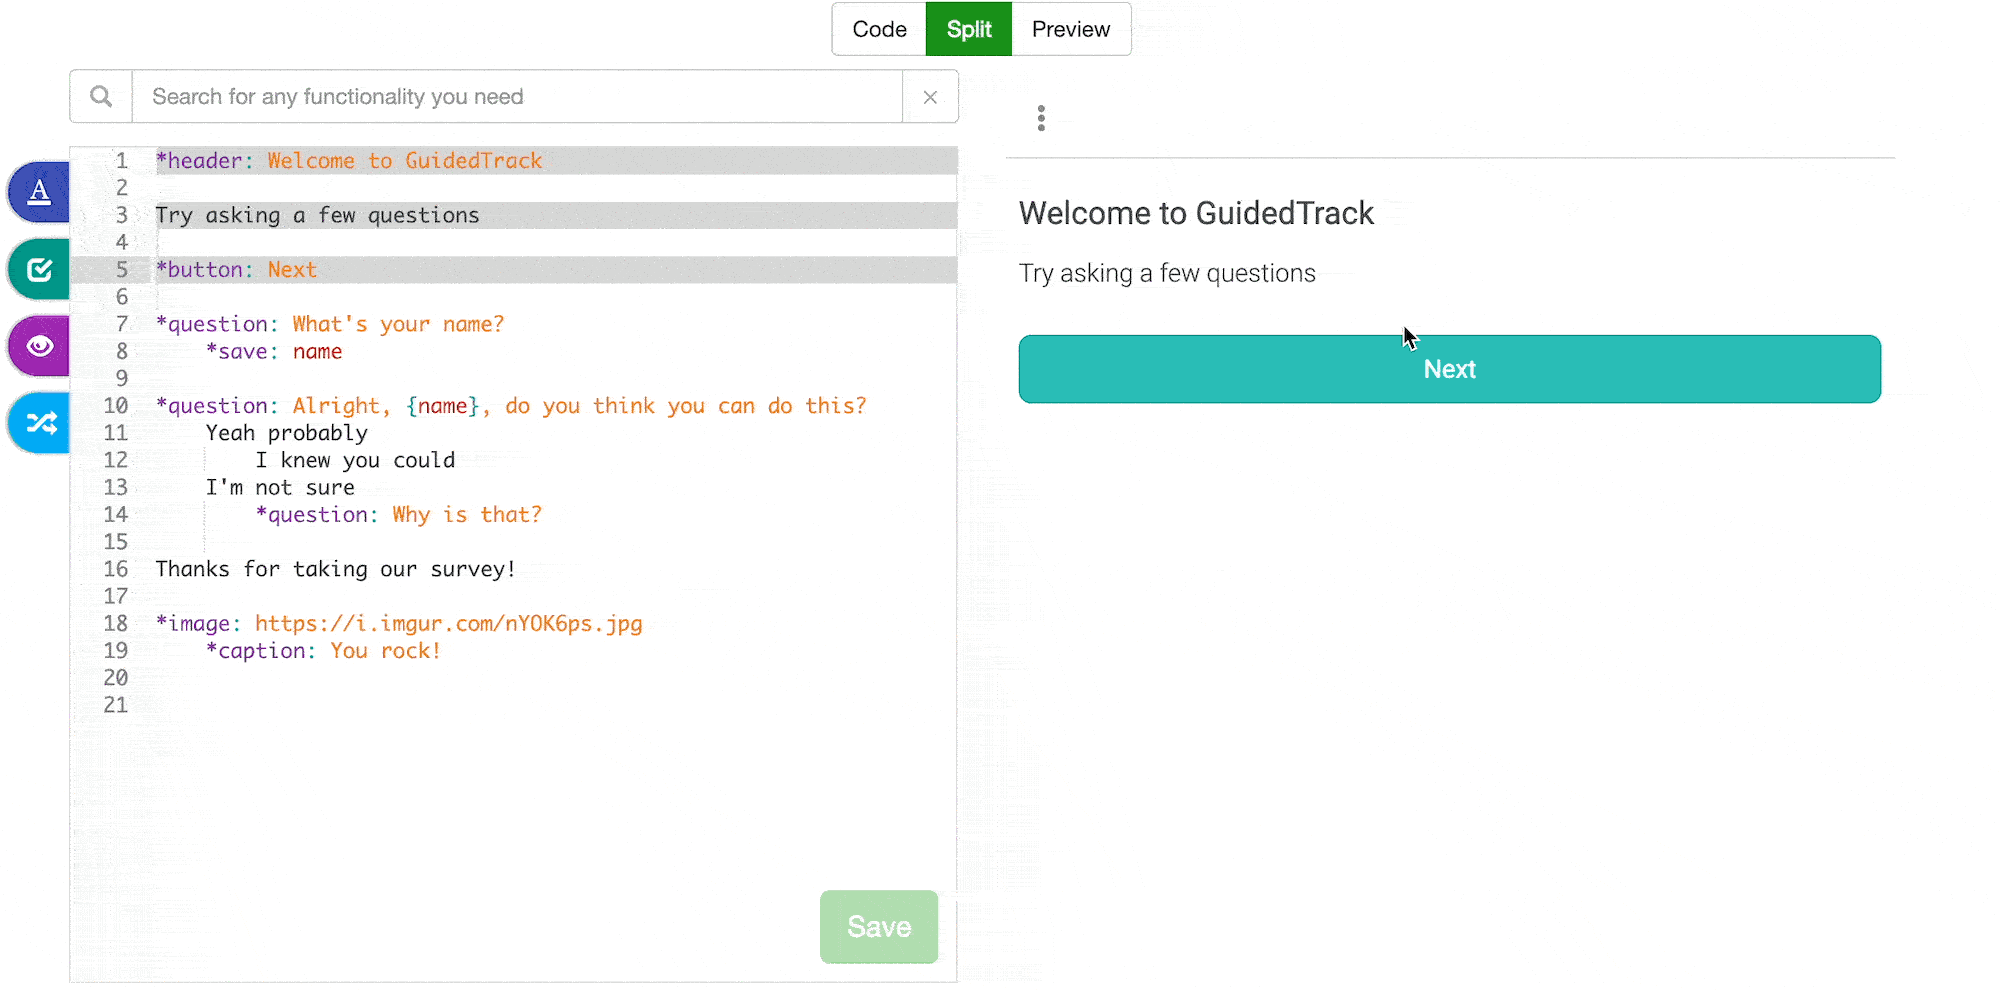 little preview of what you can do in GuidedTrack